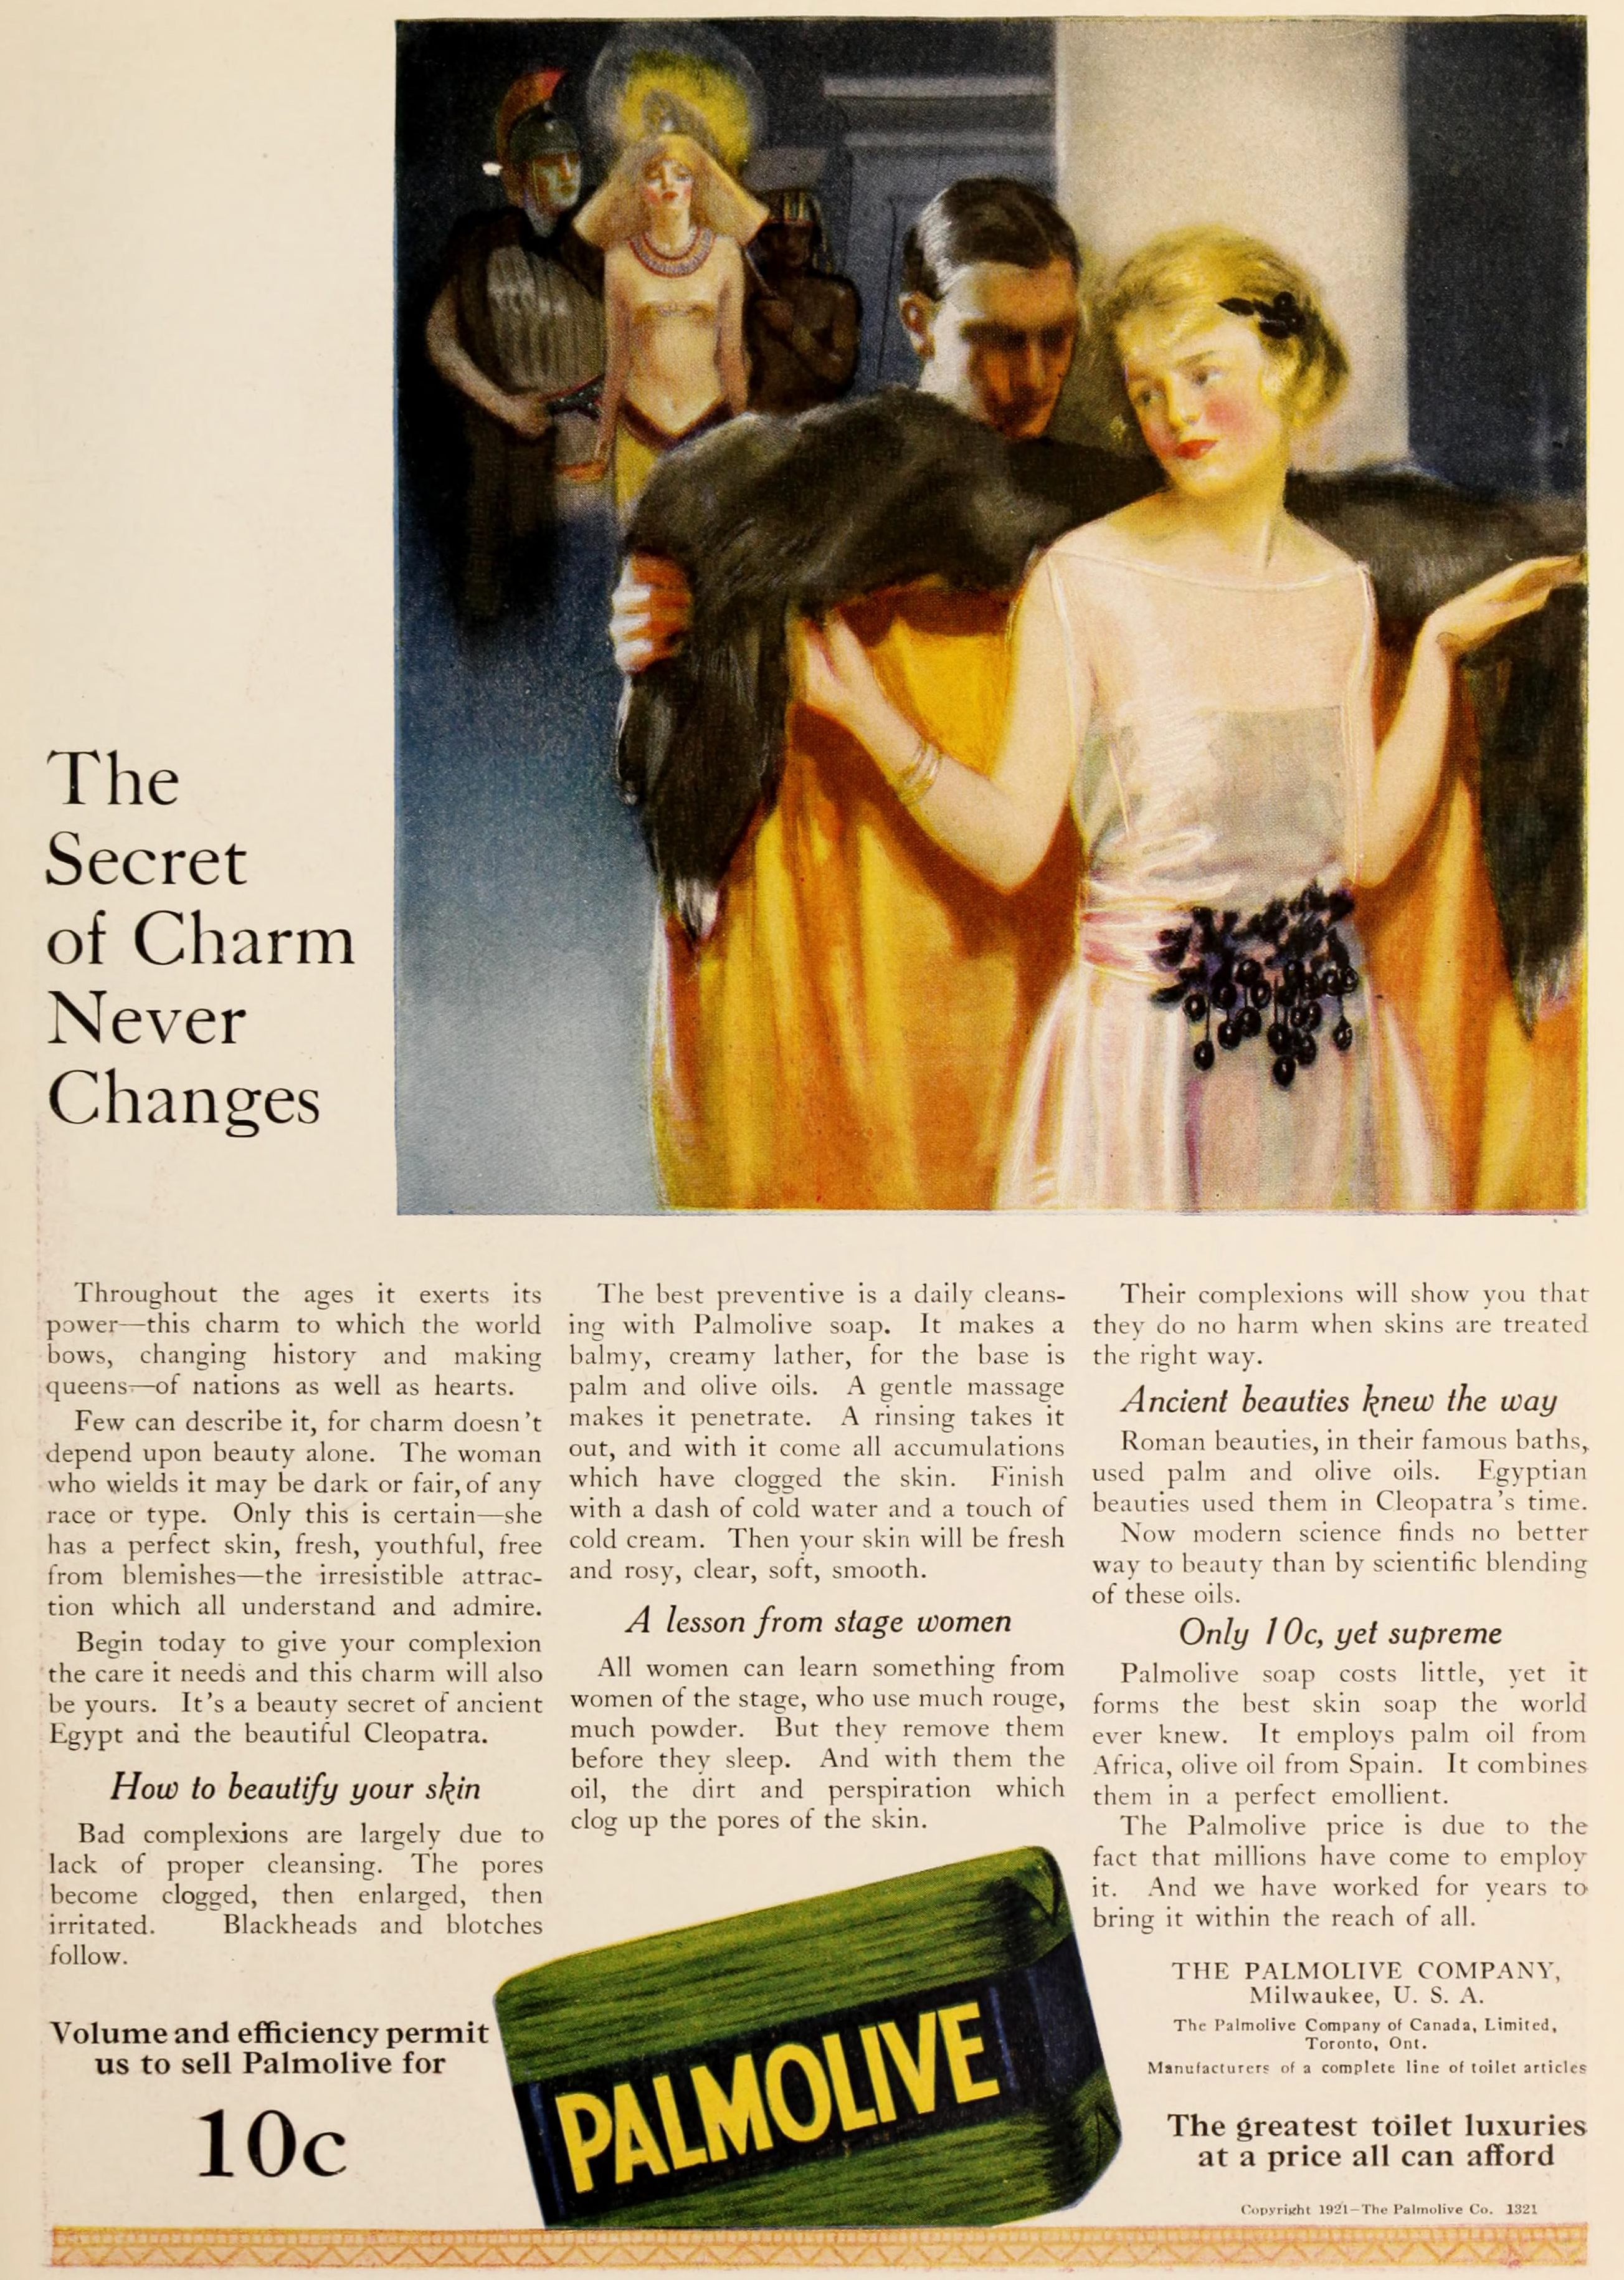 Palmolive Soap Ad Circa 1921 The Secret Of Charm Never Changes